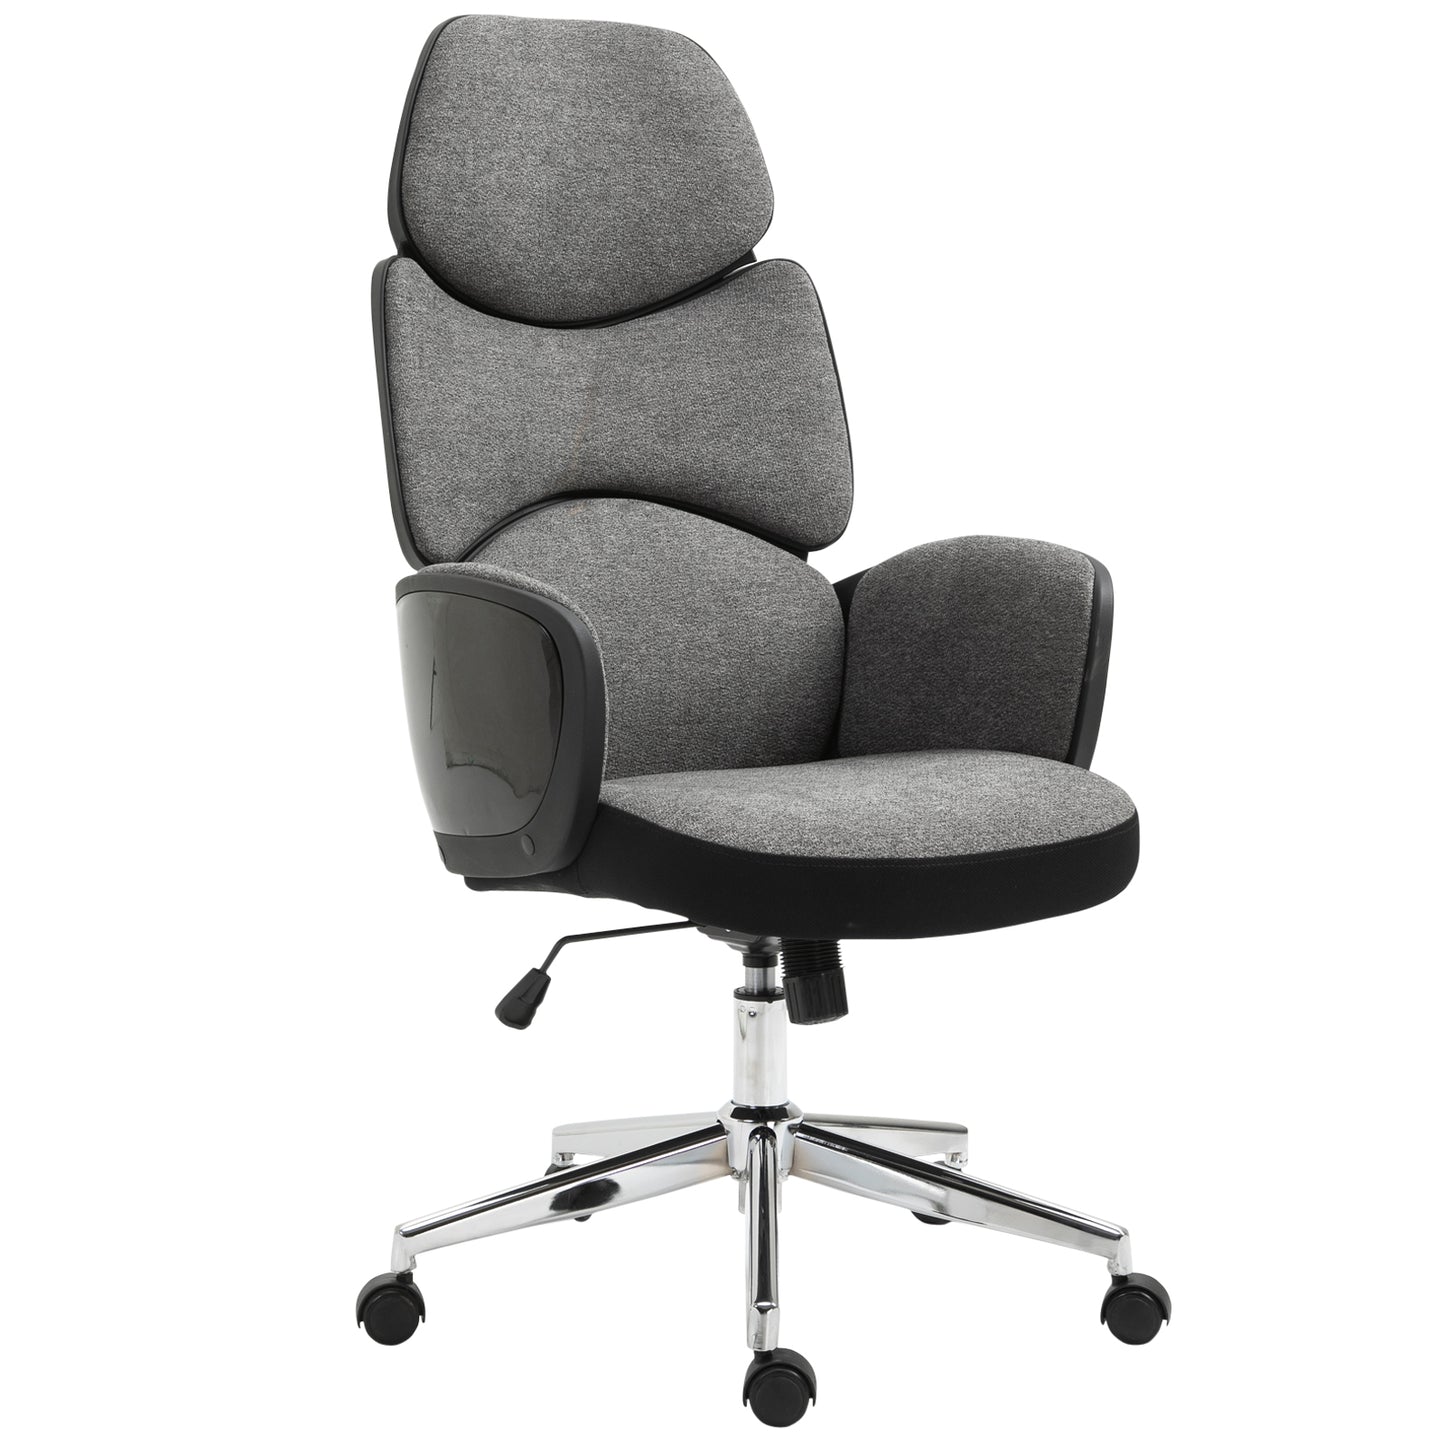 Vinsetto Padded Linen Ergonomic Chair Home Office Chair w/ Wheels Grey